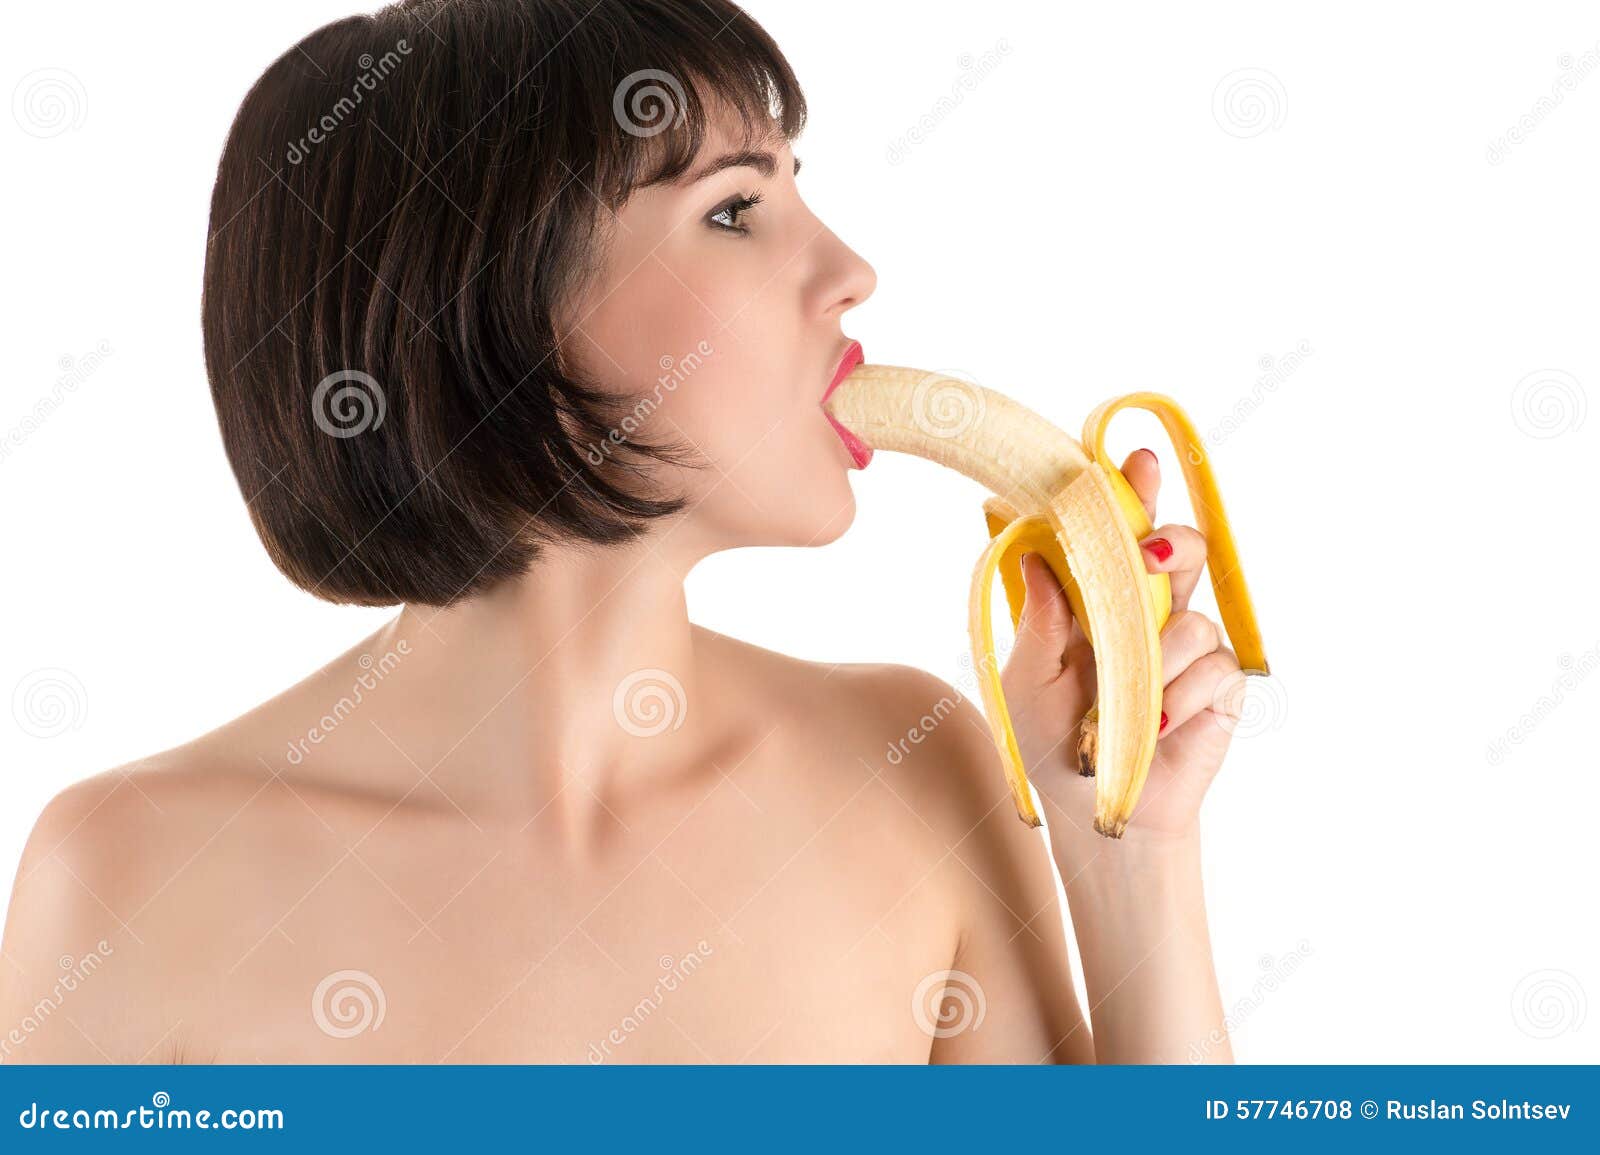 colby nicholas recommends girl sucking on banana pic